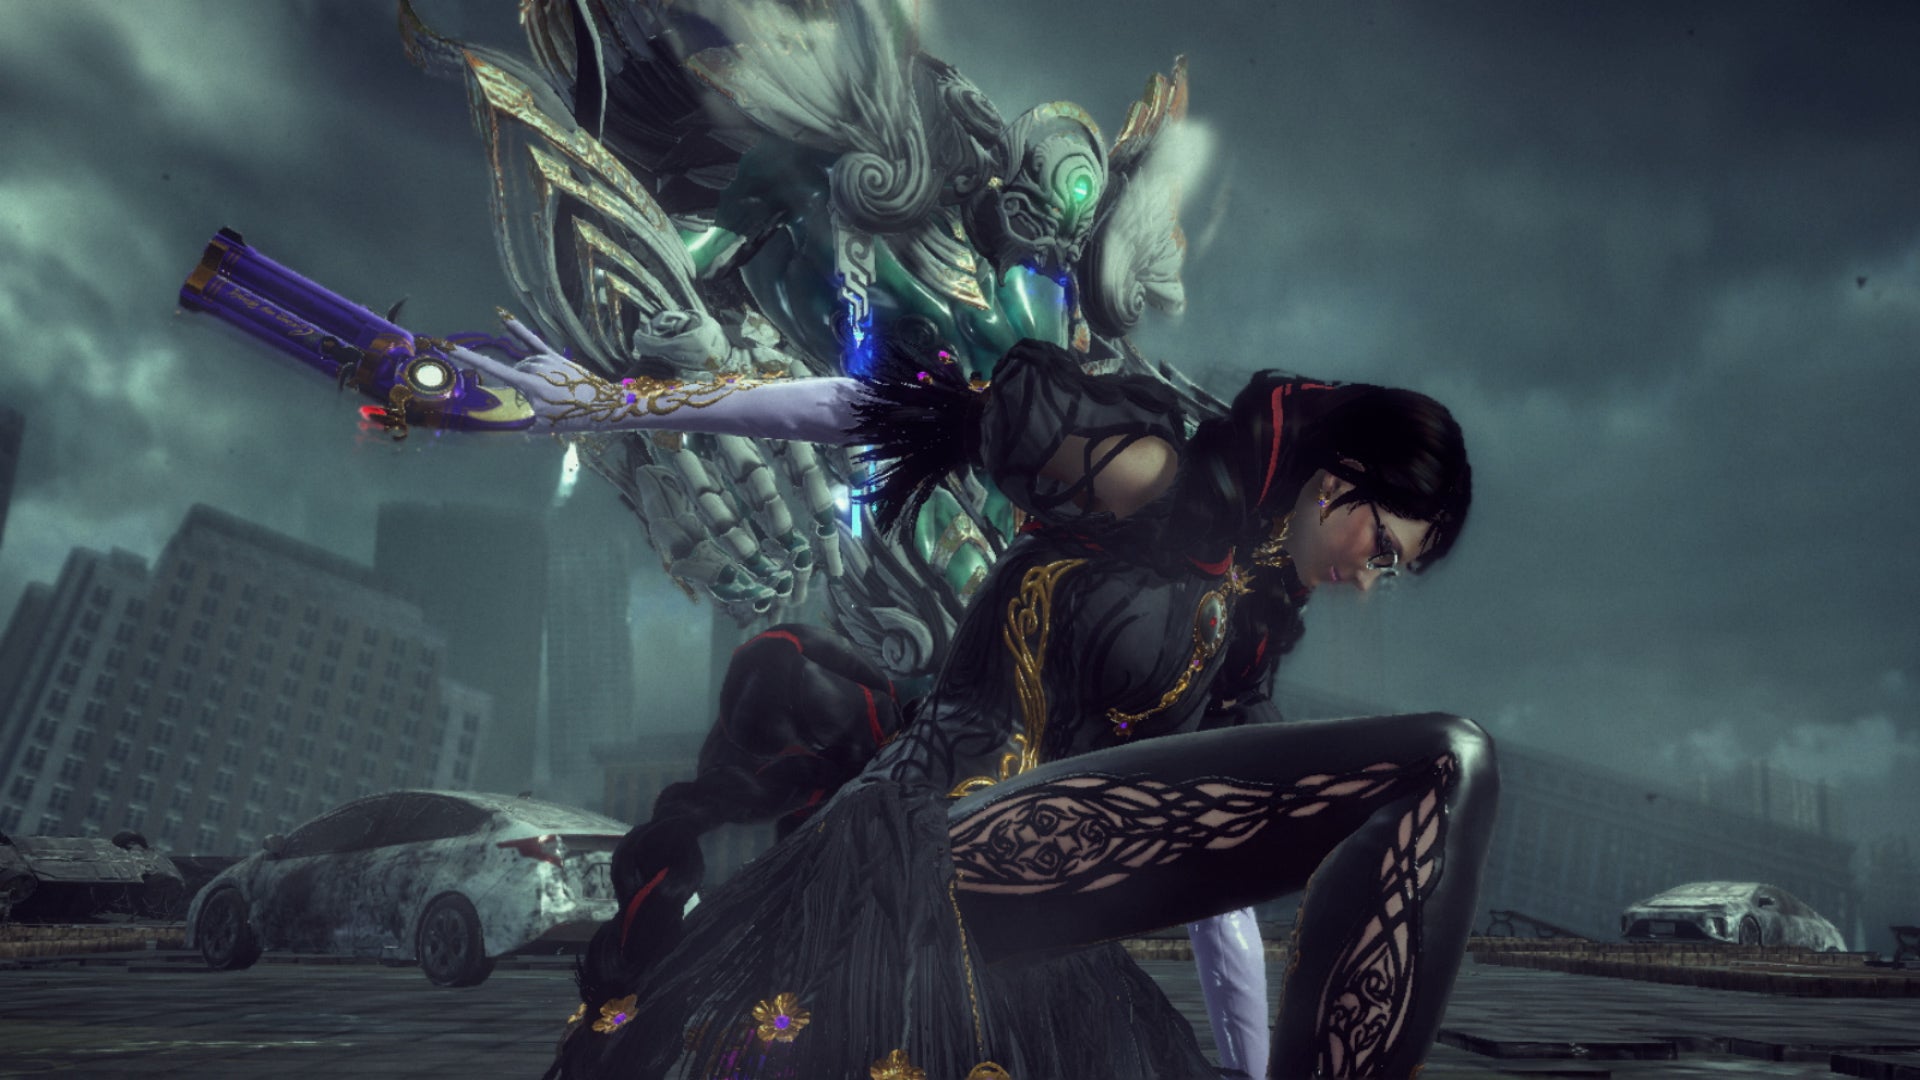 Image for Bayonetta 3 trailer shows the Umbra Witch fighting to save the world from the Homunculi